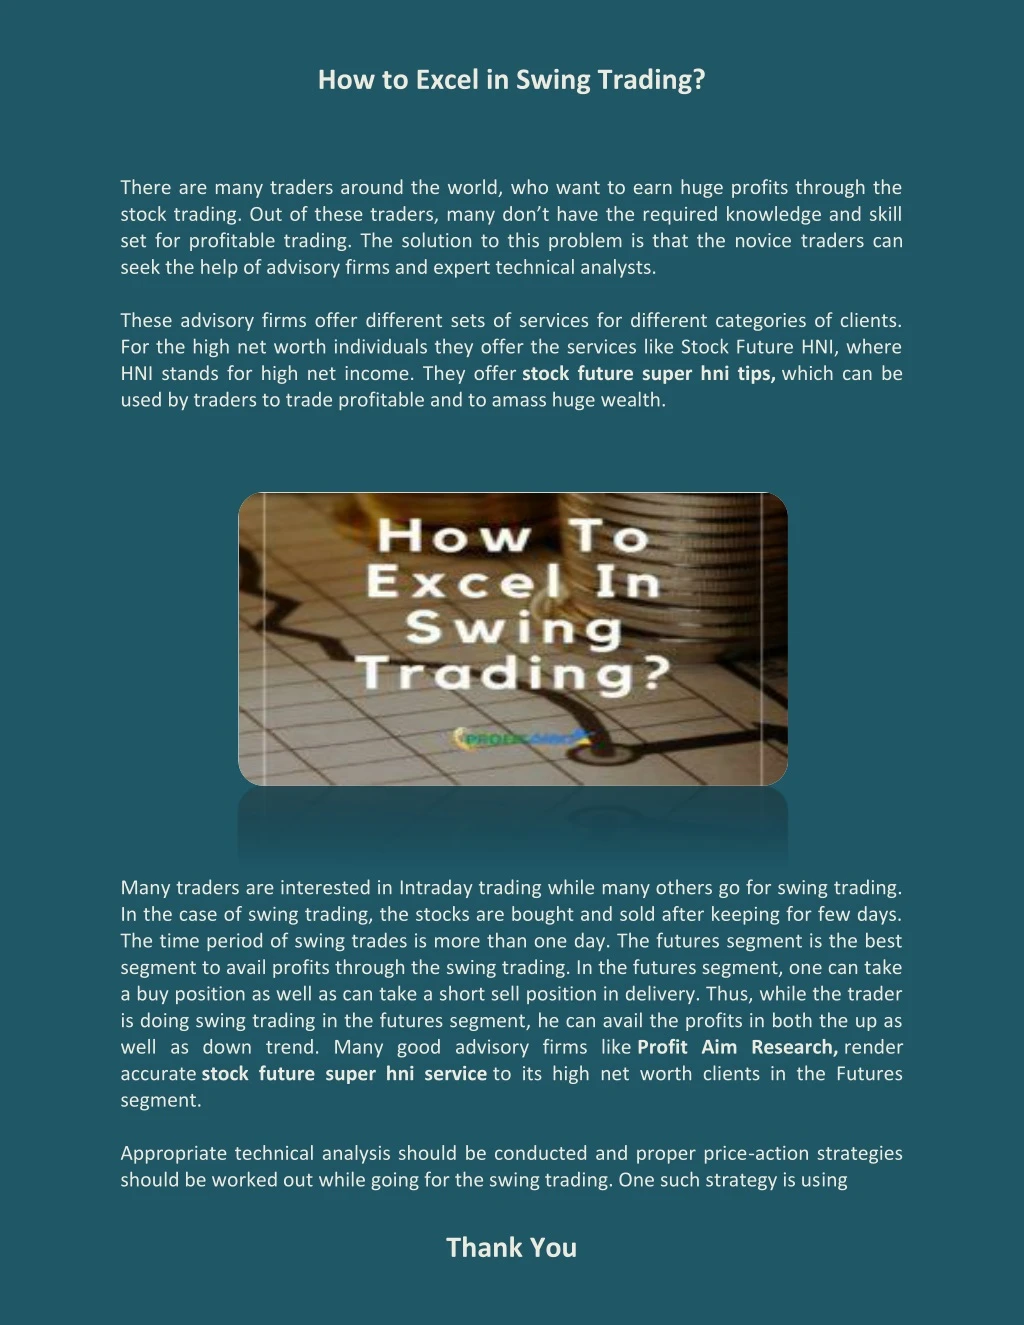 how to excel in swing trading